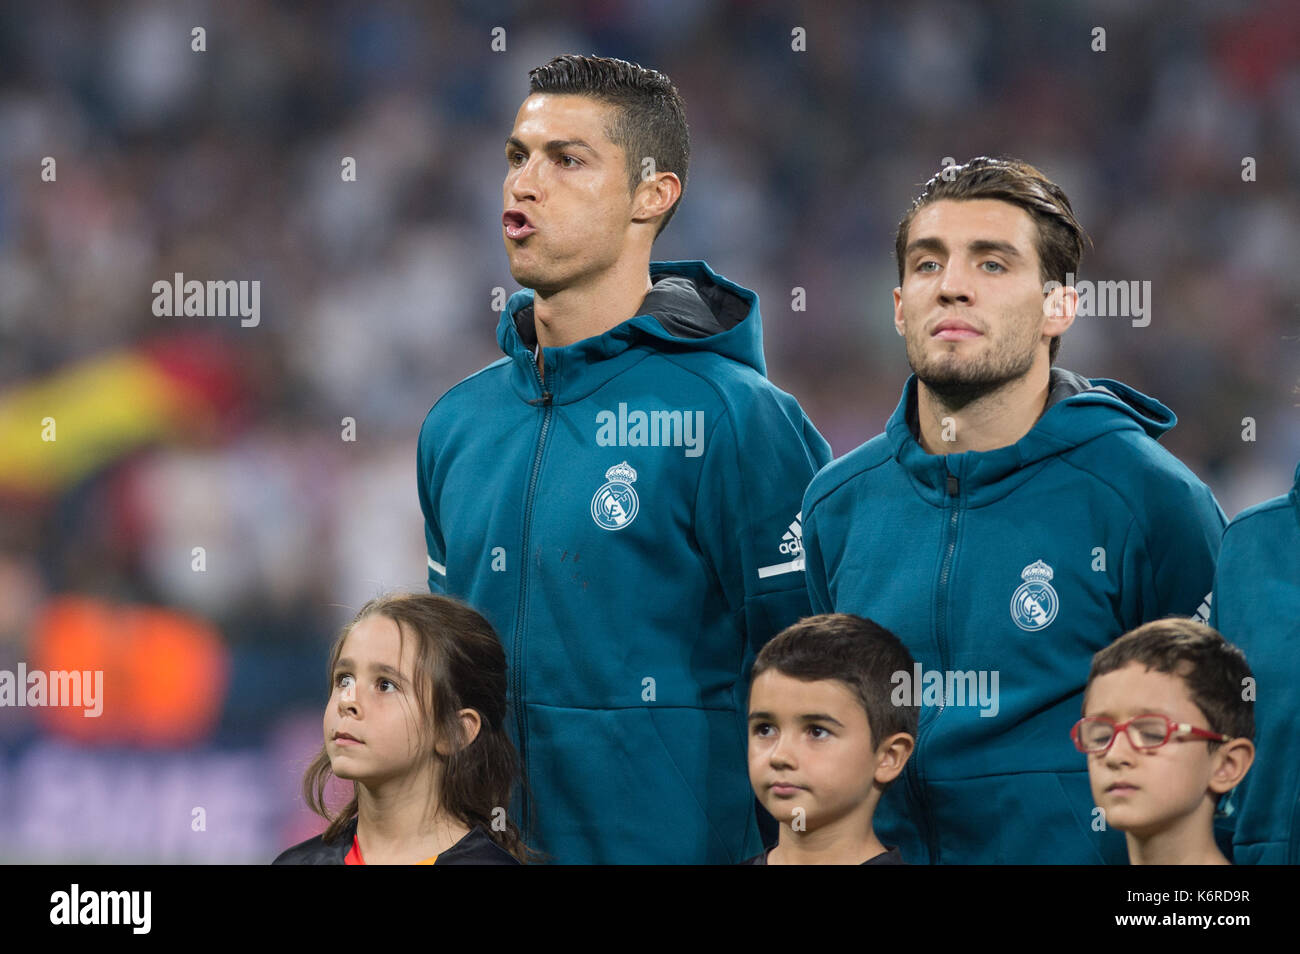 Cristiano Ronaldo and Mateo Kovacic during a Champions League group H